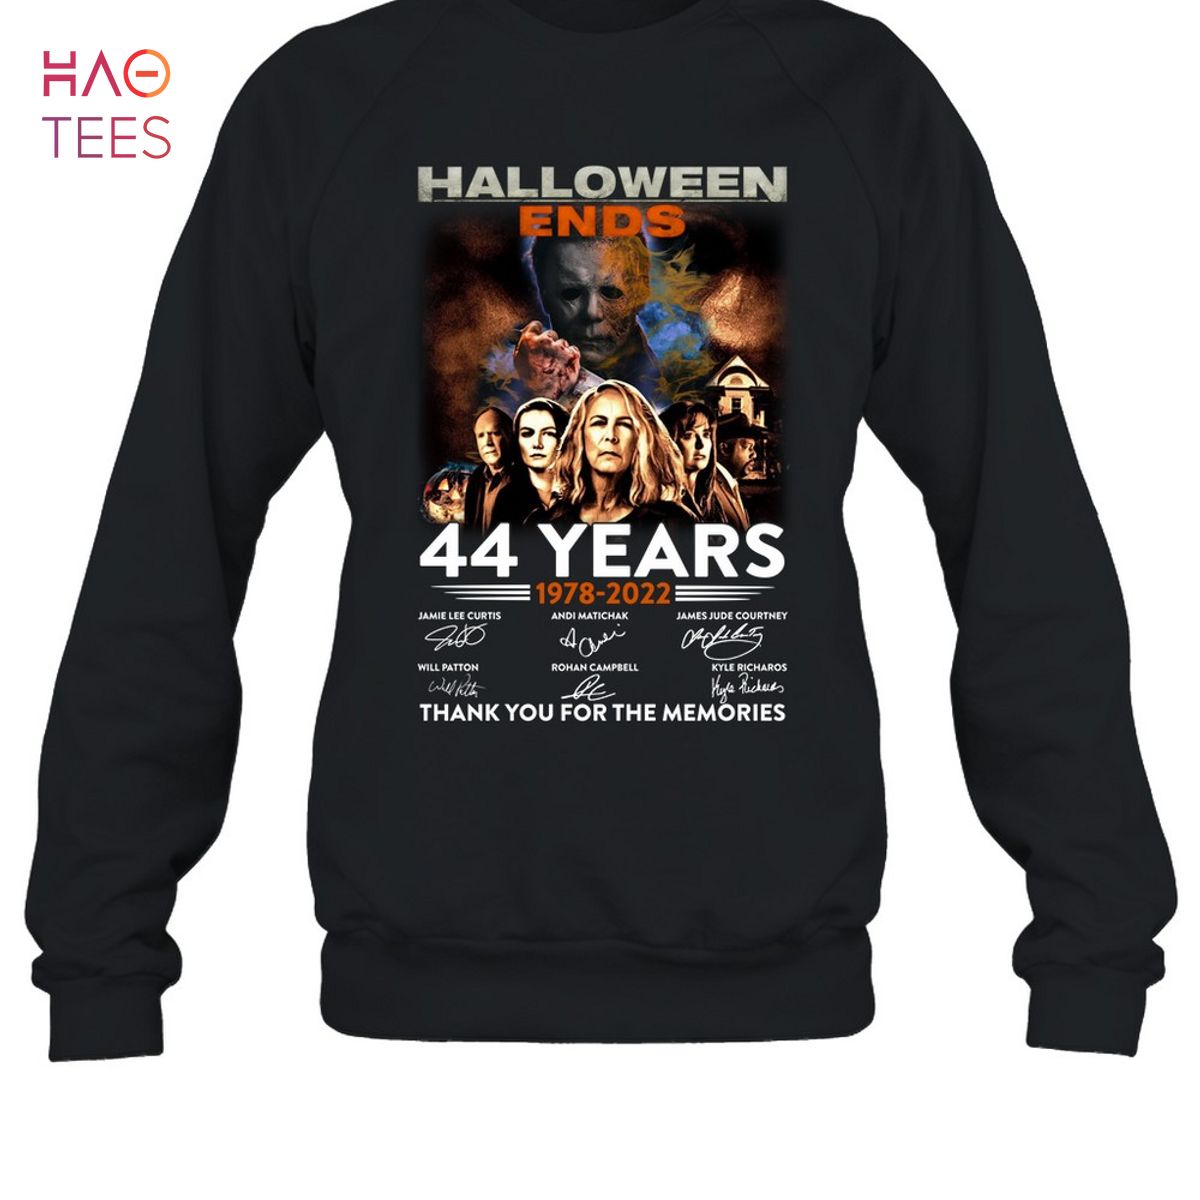 Michael myers Halloween Ends 44 Years 1978-2022 Shirt